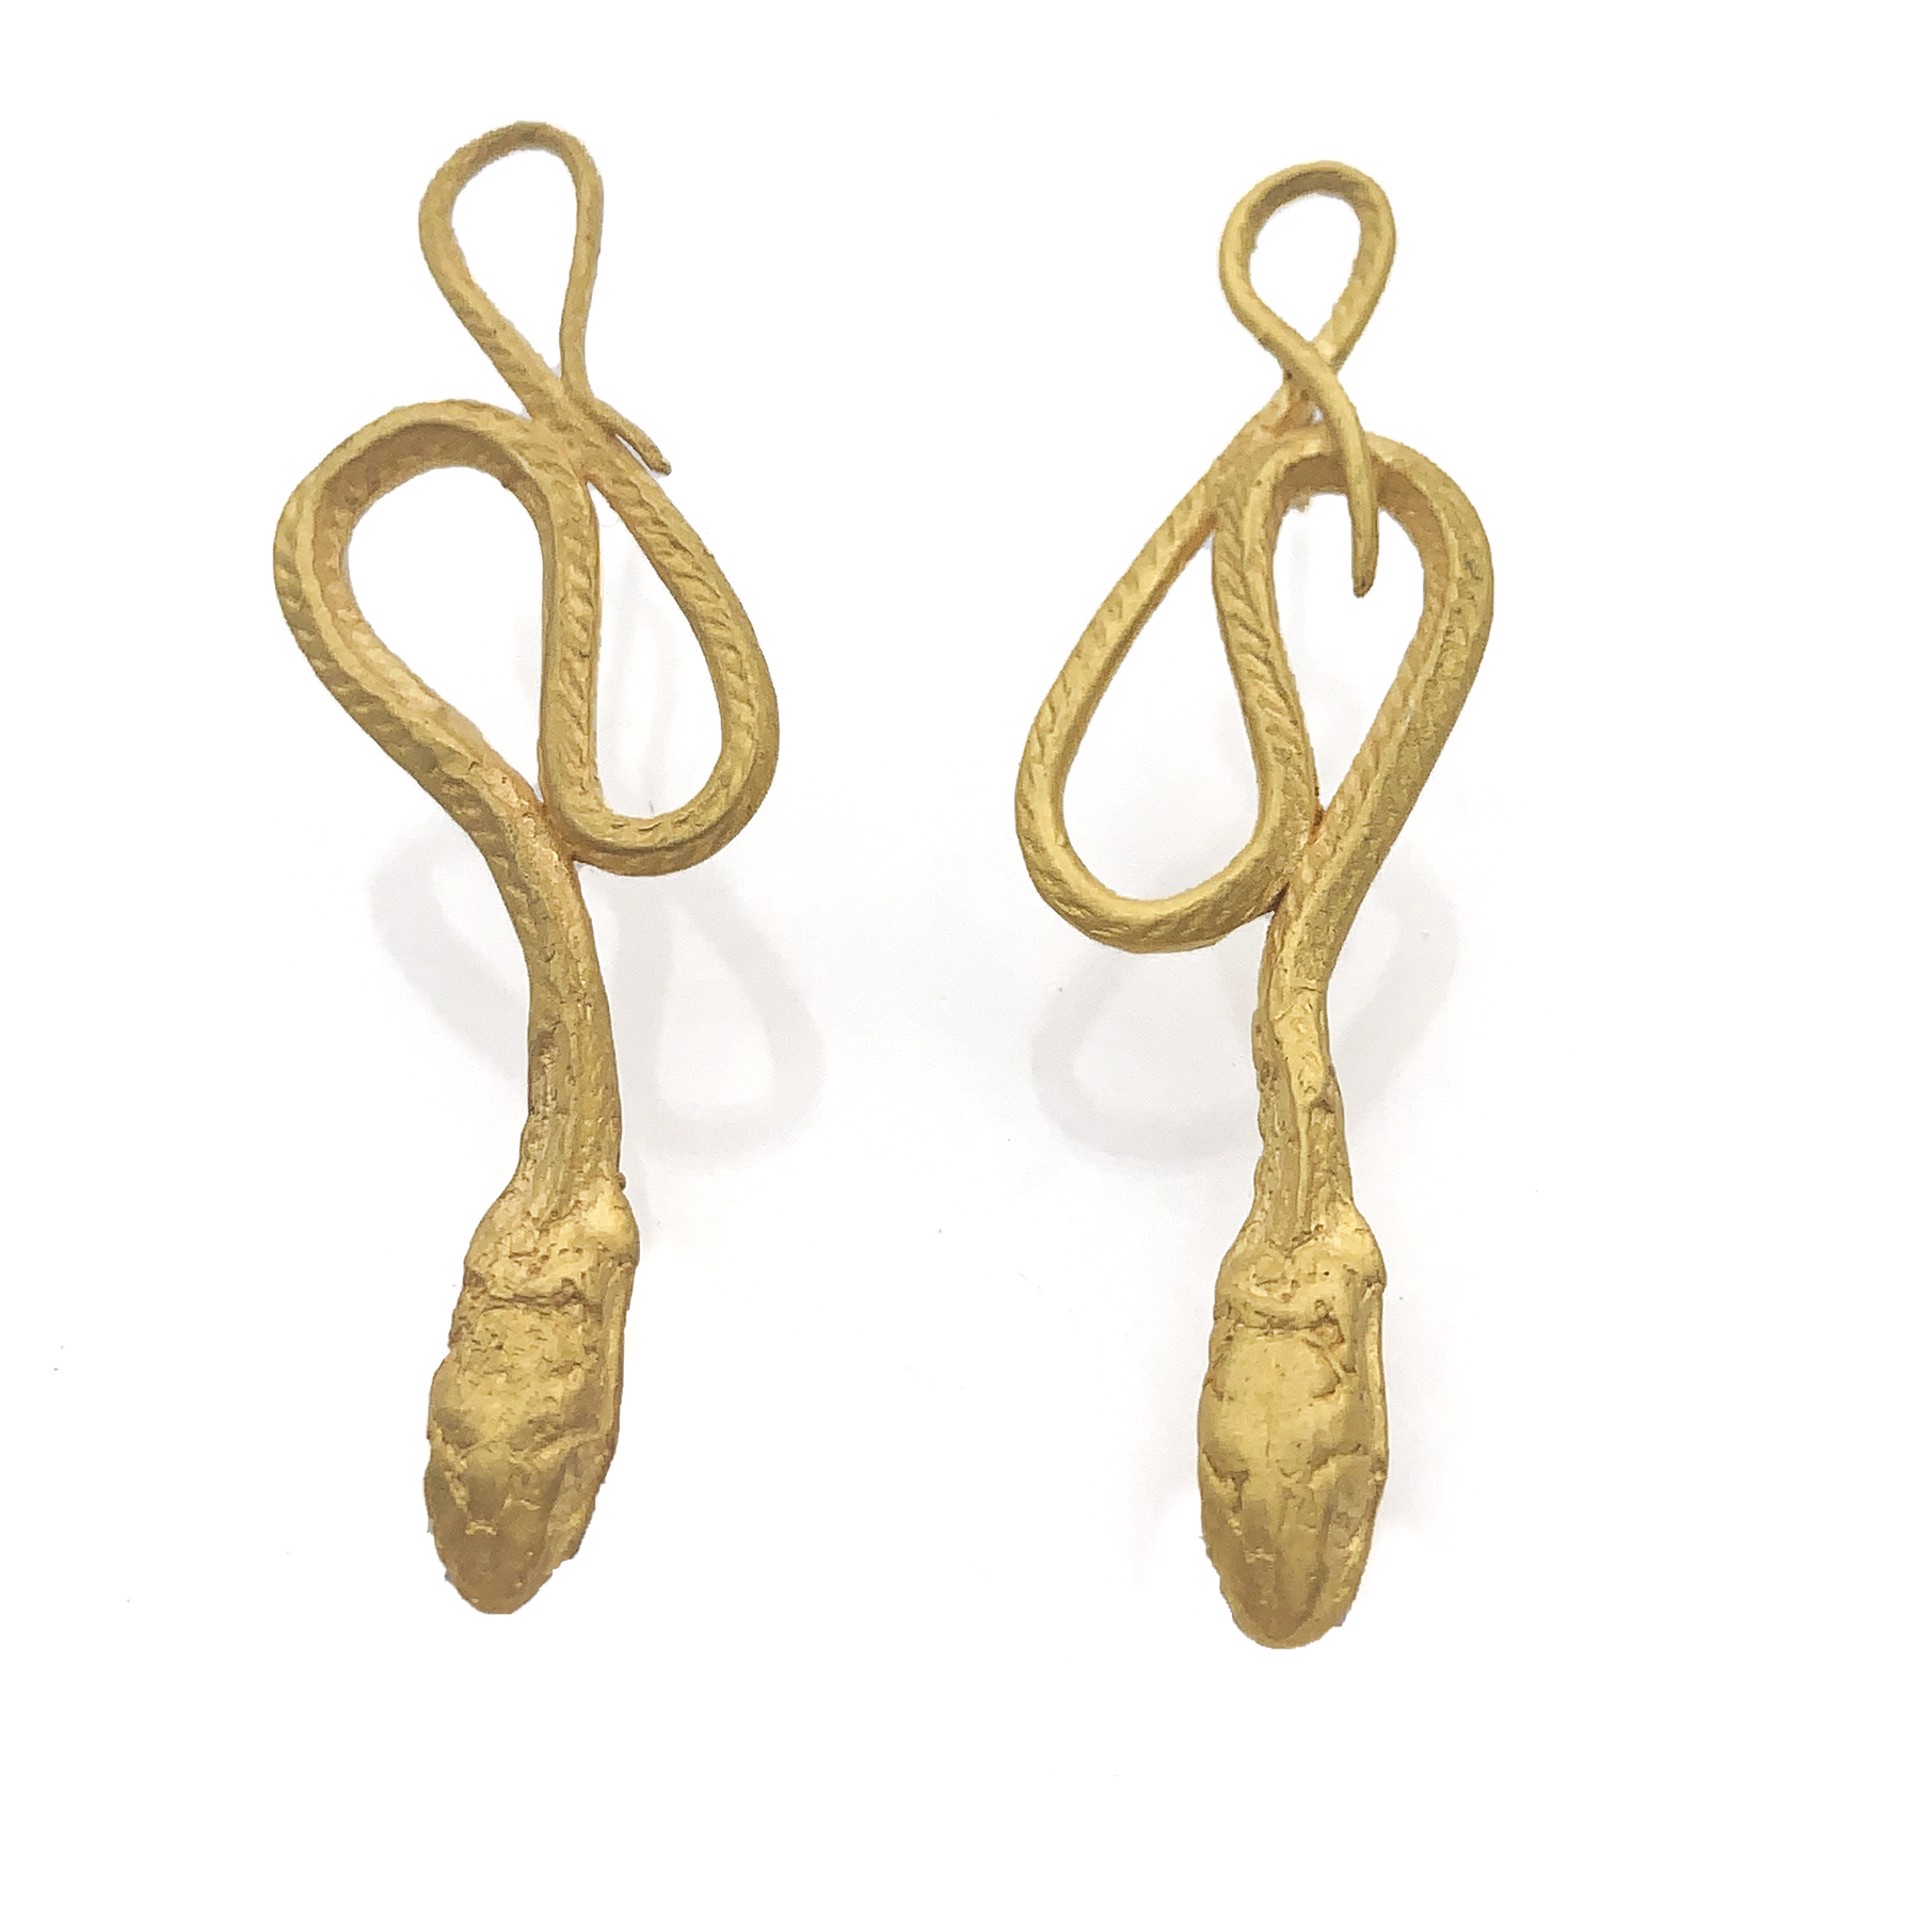 Gold Serpentine Earrings by Anna Johnson